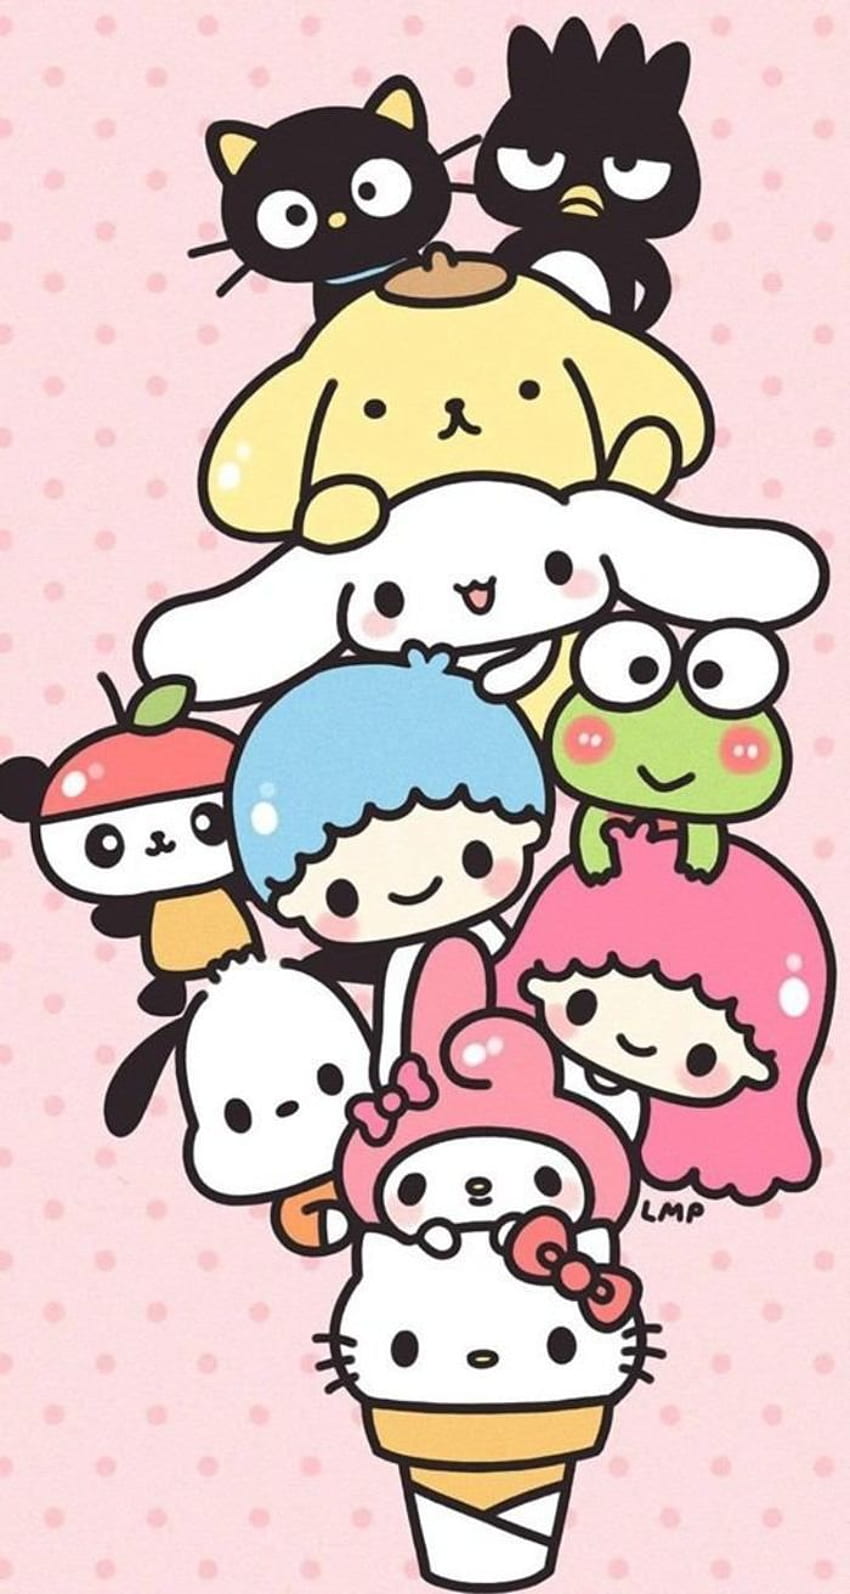 The 8 best about saniro, All Sanrio Characters HD phone wallpaper